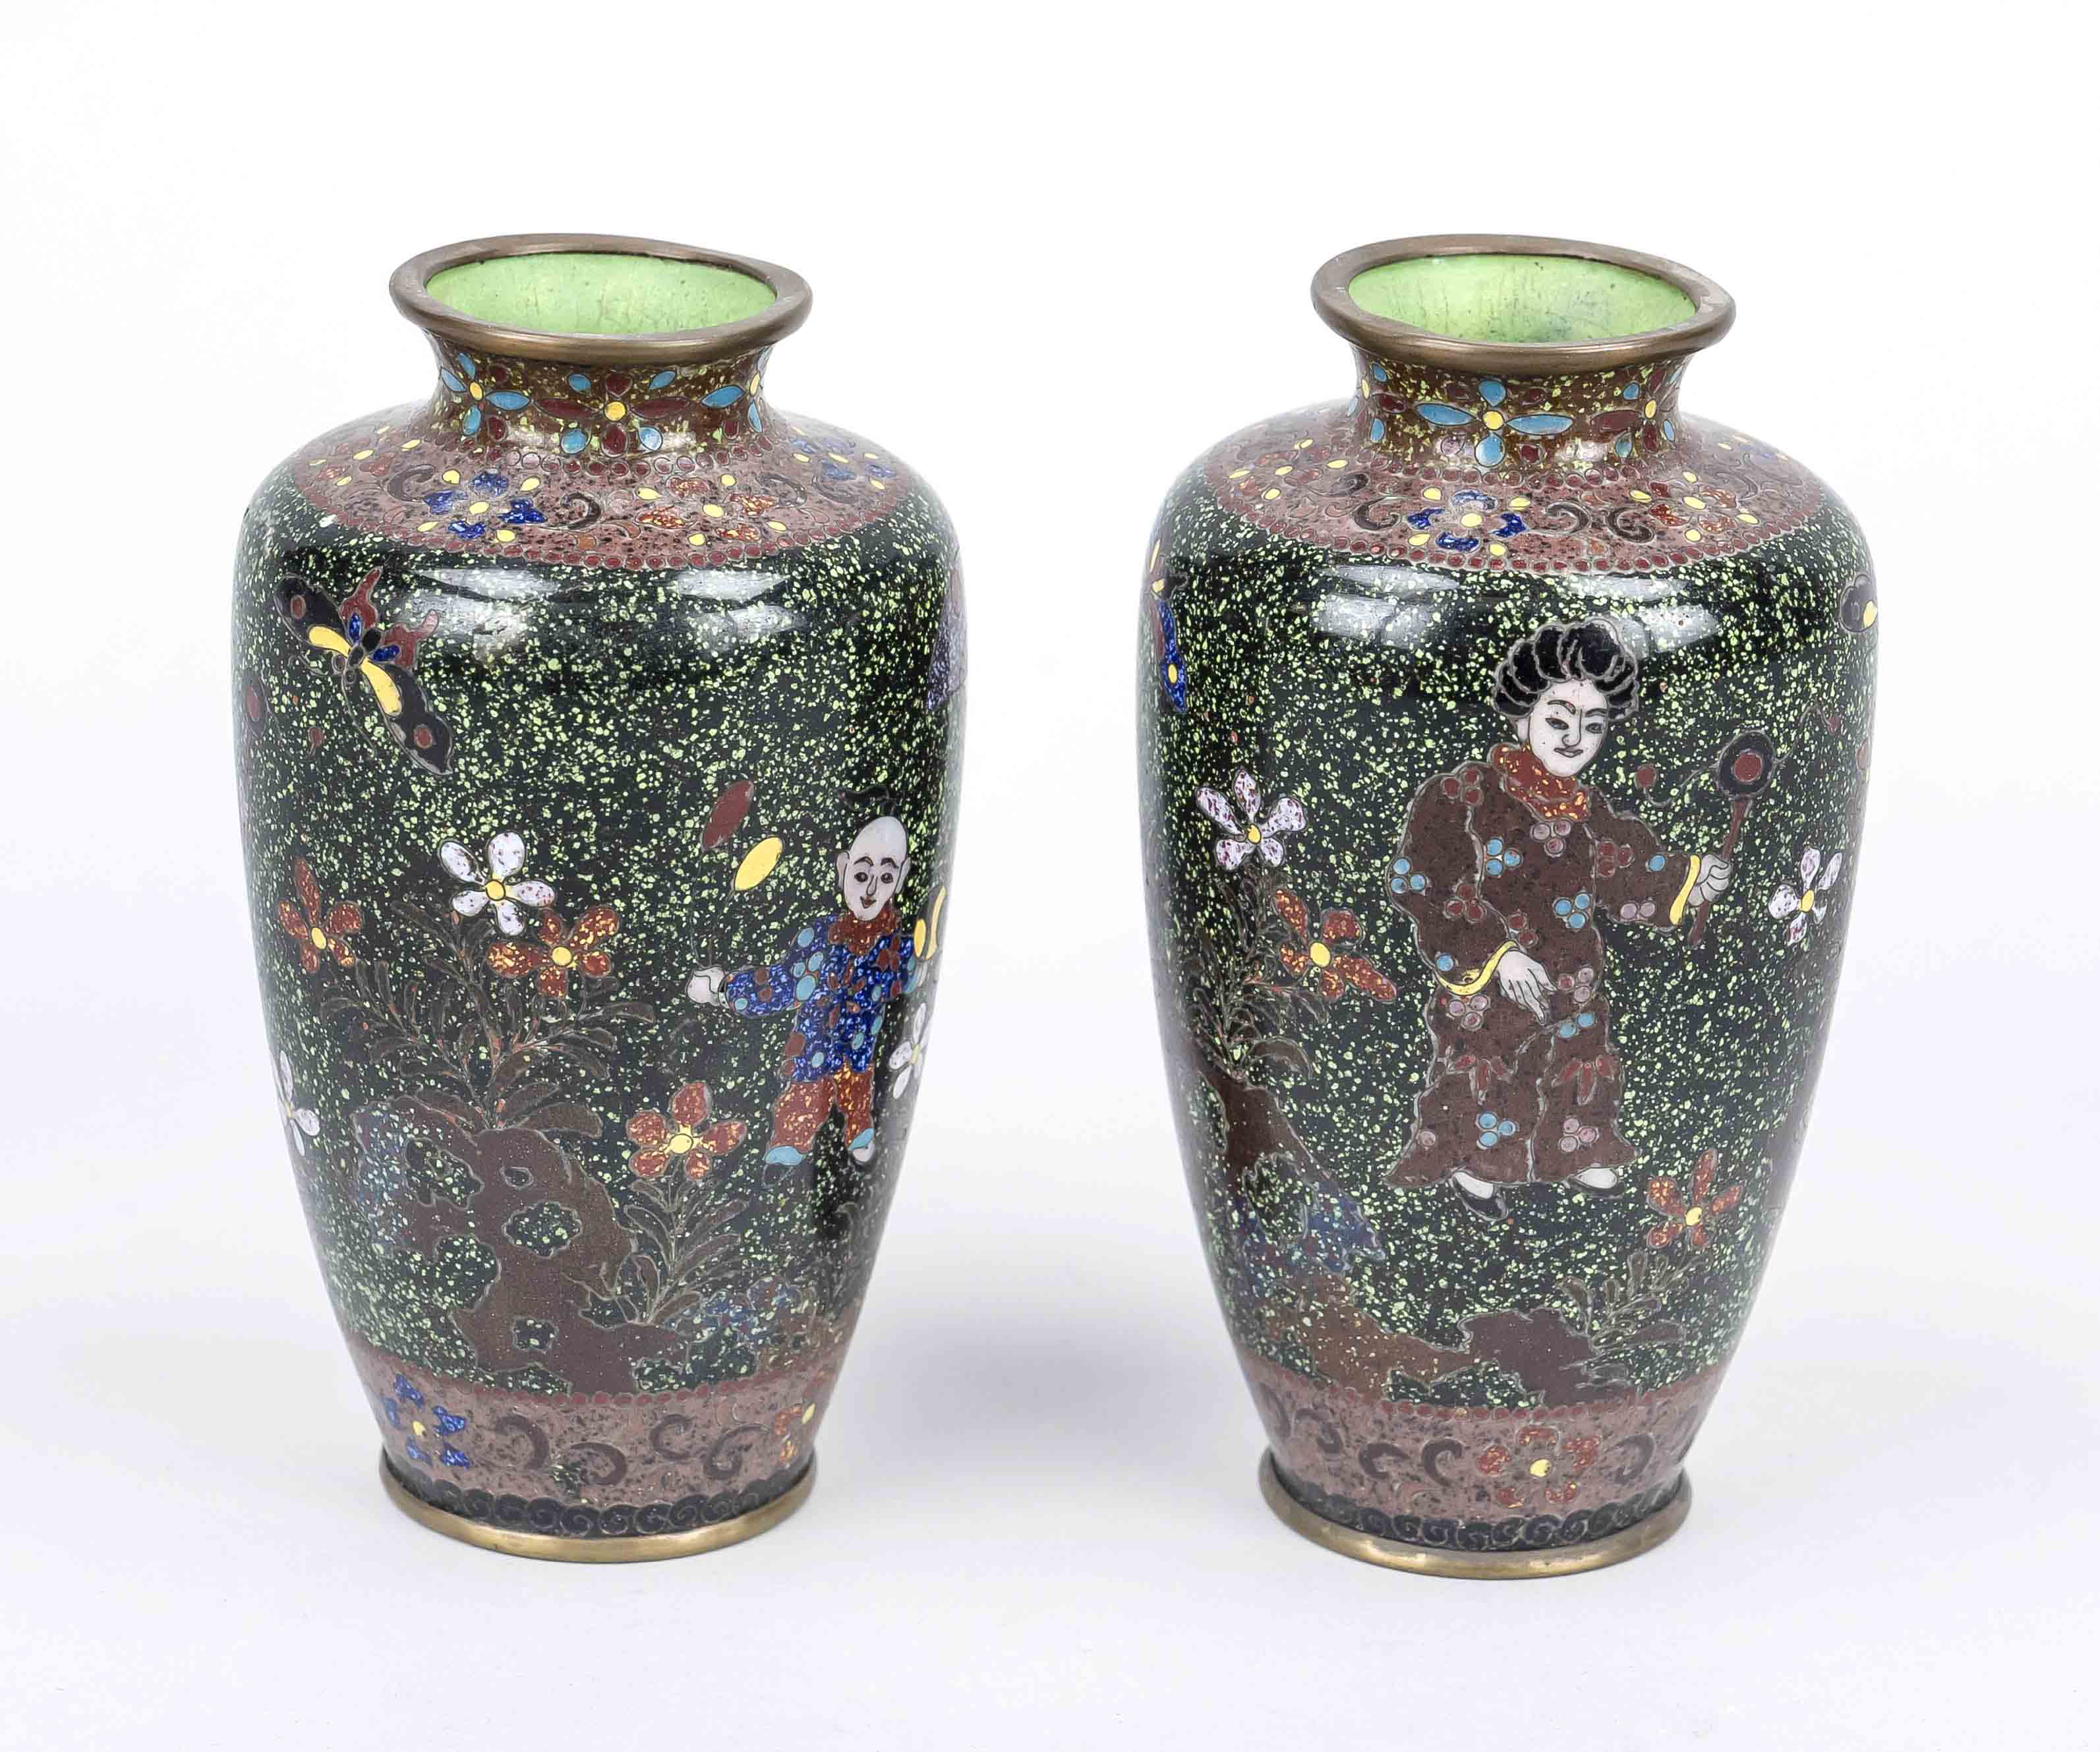 A pair of cloisonné vases, Japan, c. 1900 (Meiji). rubbed and slightly chipped, h. 12 cm